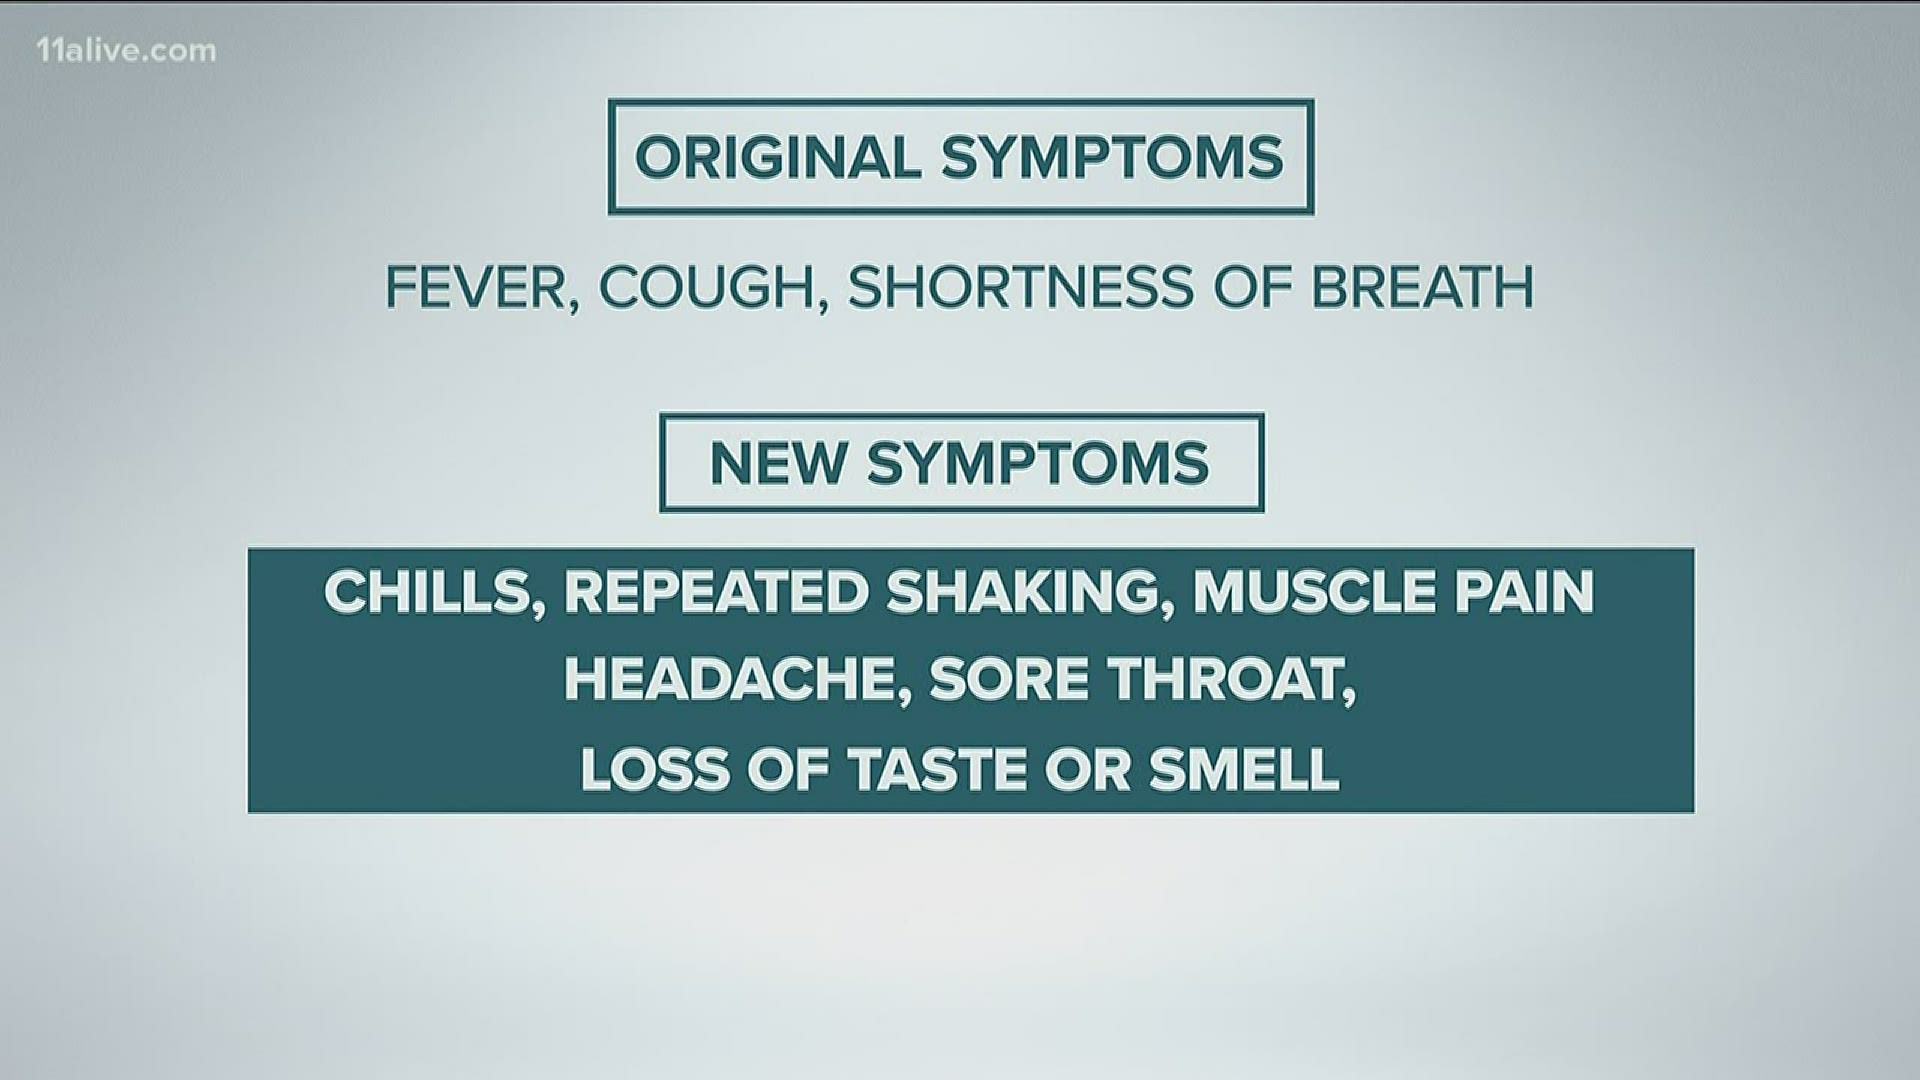 The federal agency says the symptoms may appear 2-to-14 days after exposure to the virus.